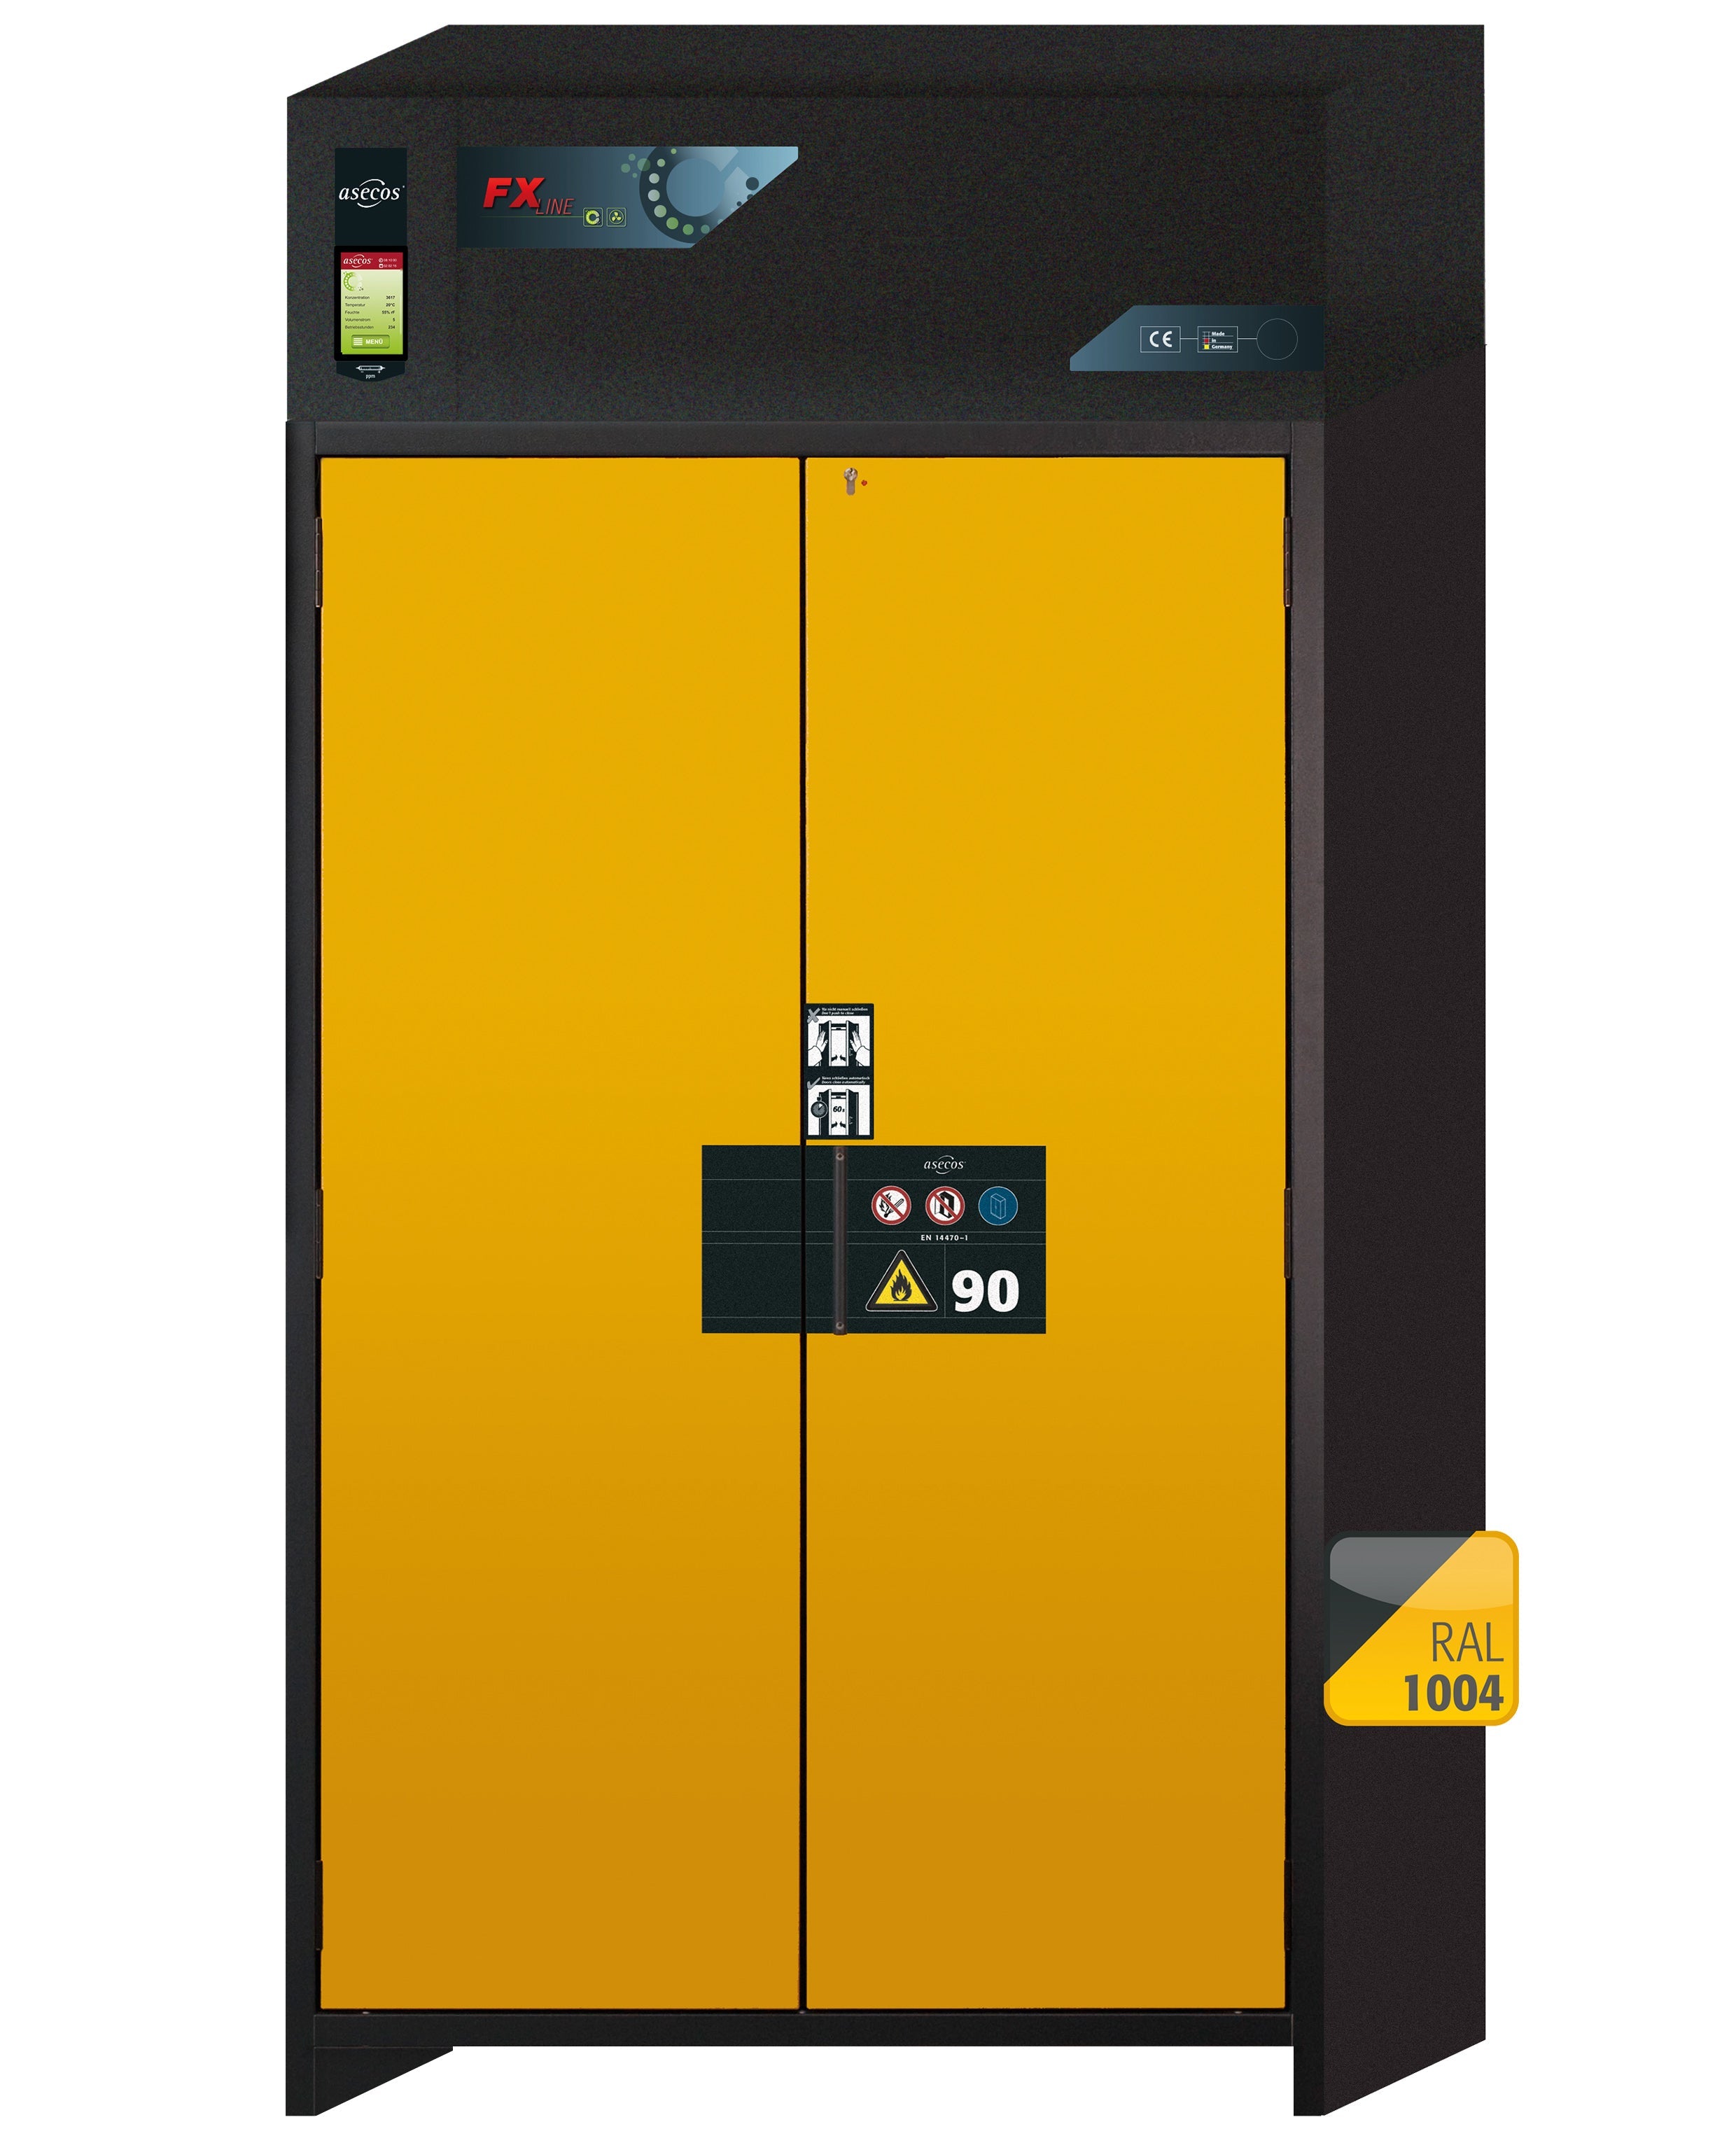 Type 90 recirculating air filter cabinet FX-PEGASUS-90 model FX90.229.120.WDAC in safety yellow RAL 1004 with 3x standard shelves (sheet steel)